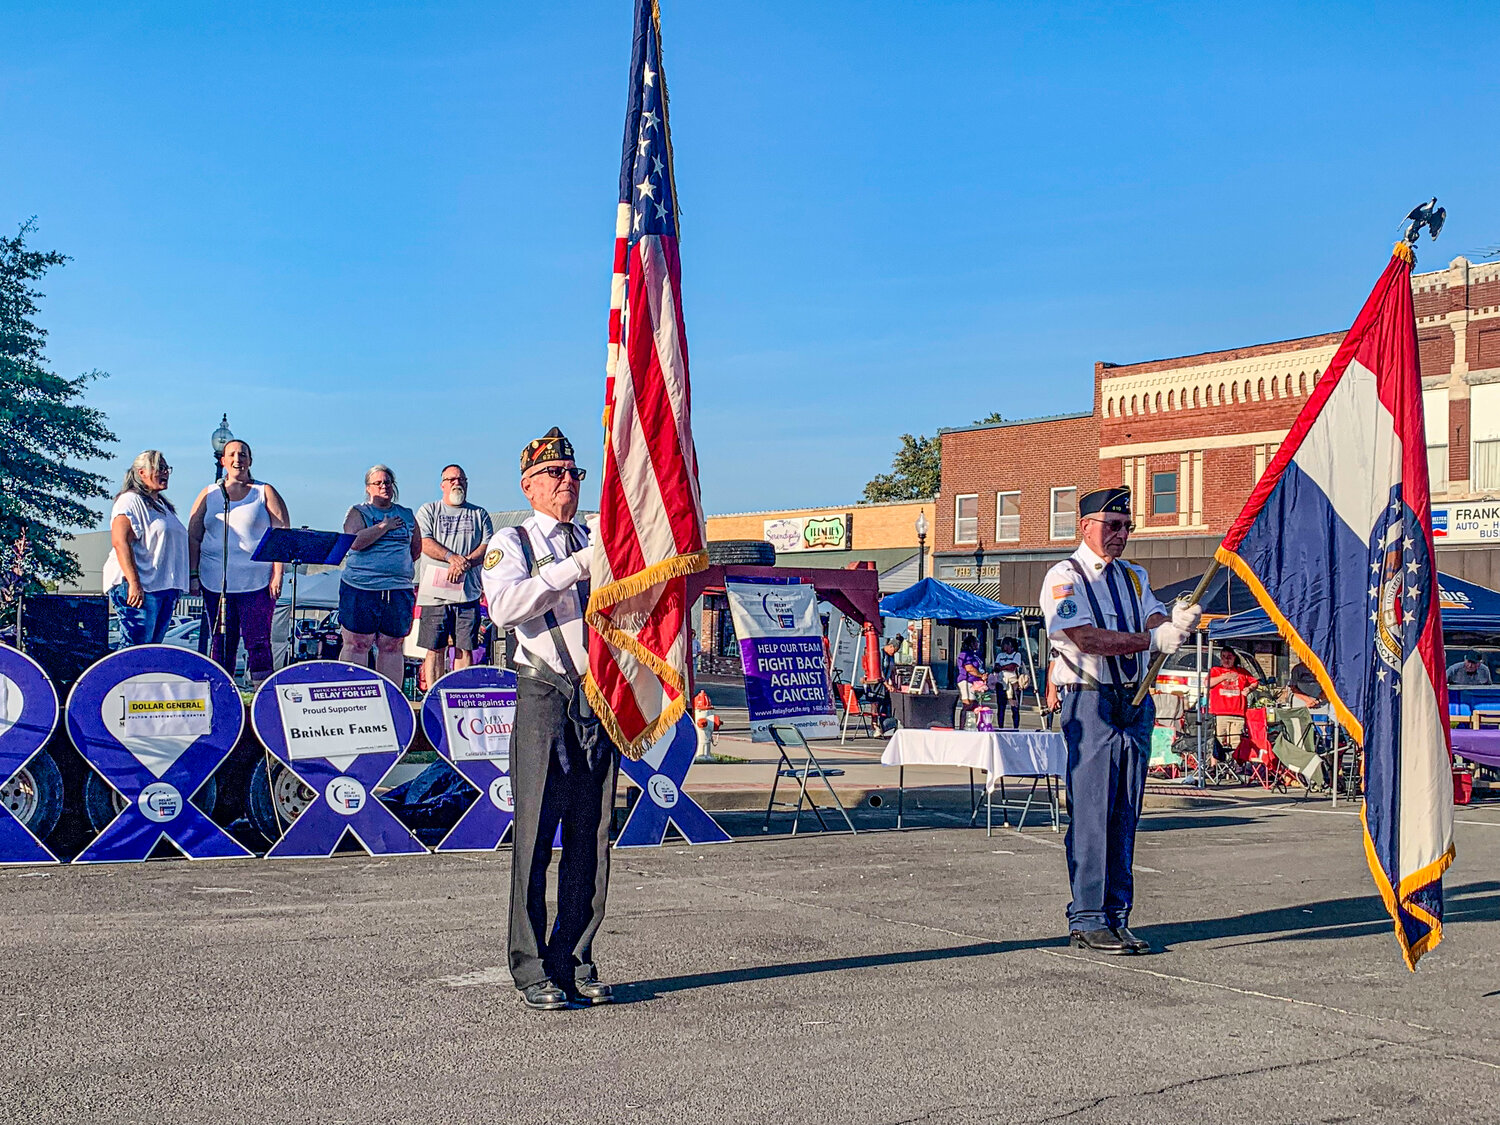 Members of the Centralia VFW Post 6276 provided the colors at the Audrain County Relay For Life event on Saturday, Sept. 9, at the Audrain County Courthouse. The Centralia American Legion Post 113 provided a gun salute.